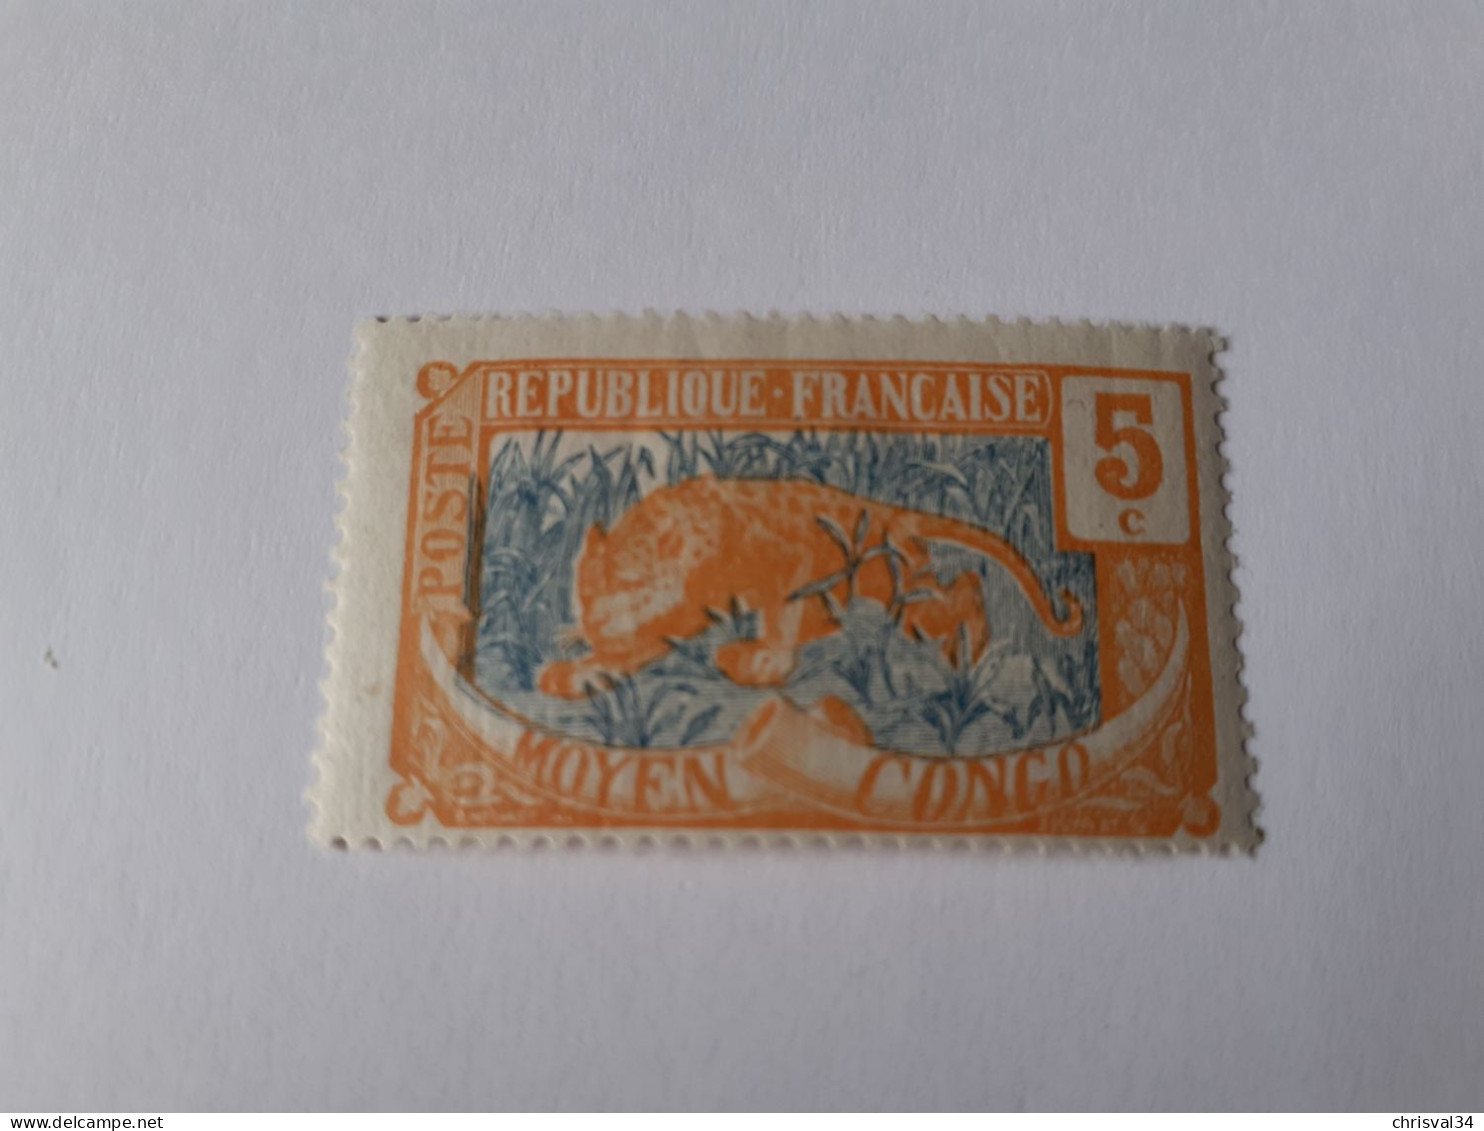 TIMBRE  CONGO    N  67     COTE  1,50  EUROS    NEUF  TRACE  CHARNIERE - Ungebraucht